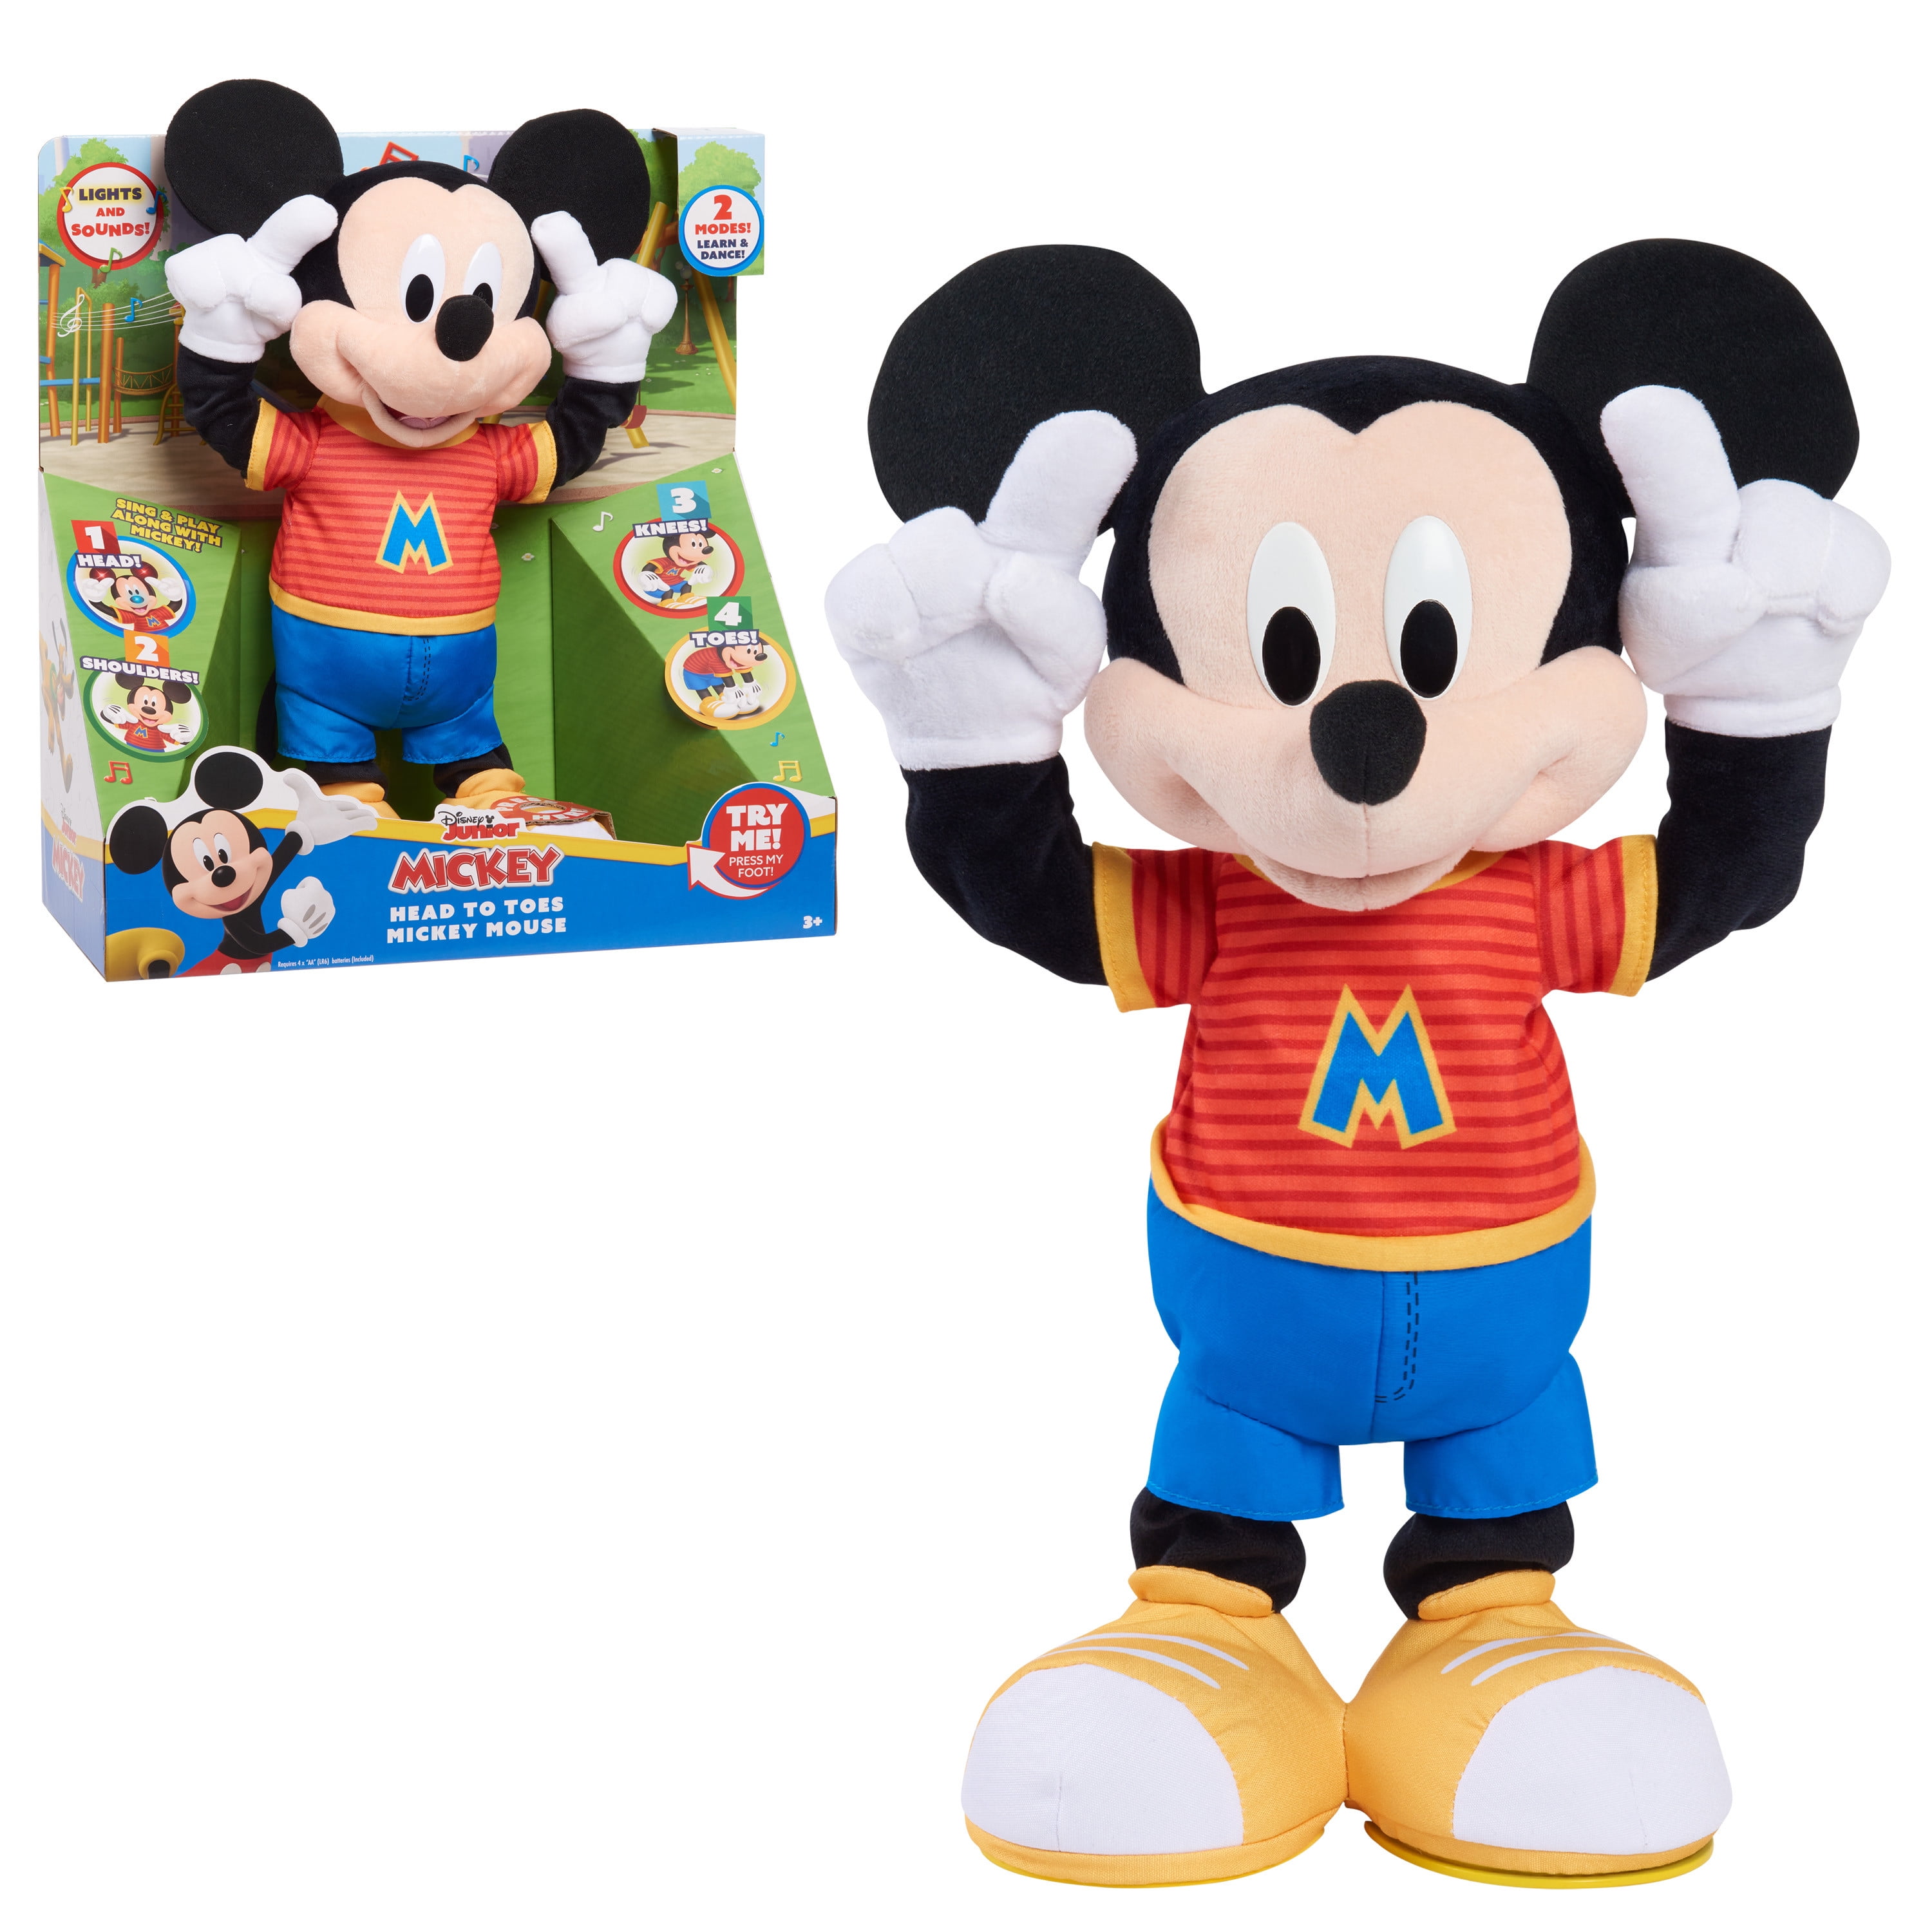 Just Play Squeeze Me Multi Color New Disney 5” Plush Minnie Mouse 